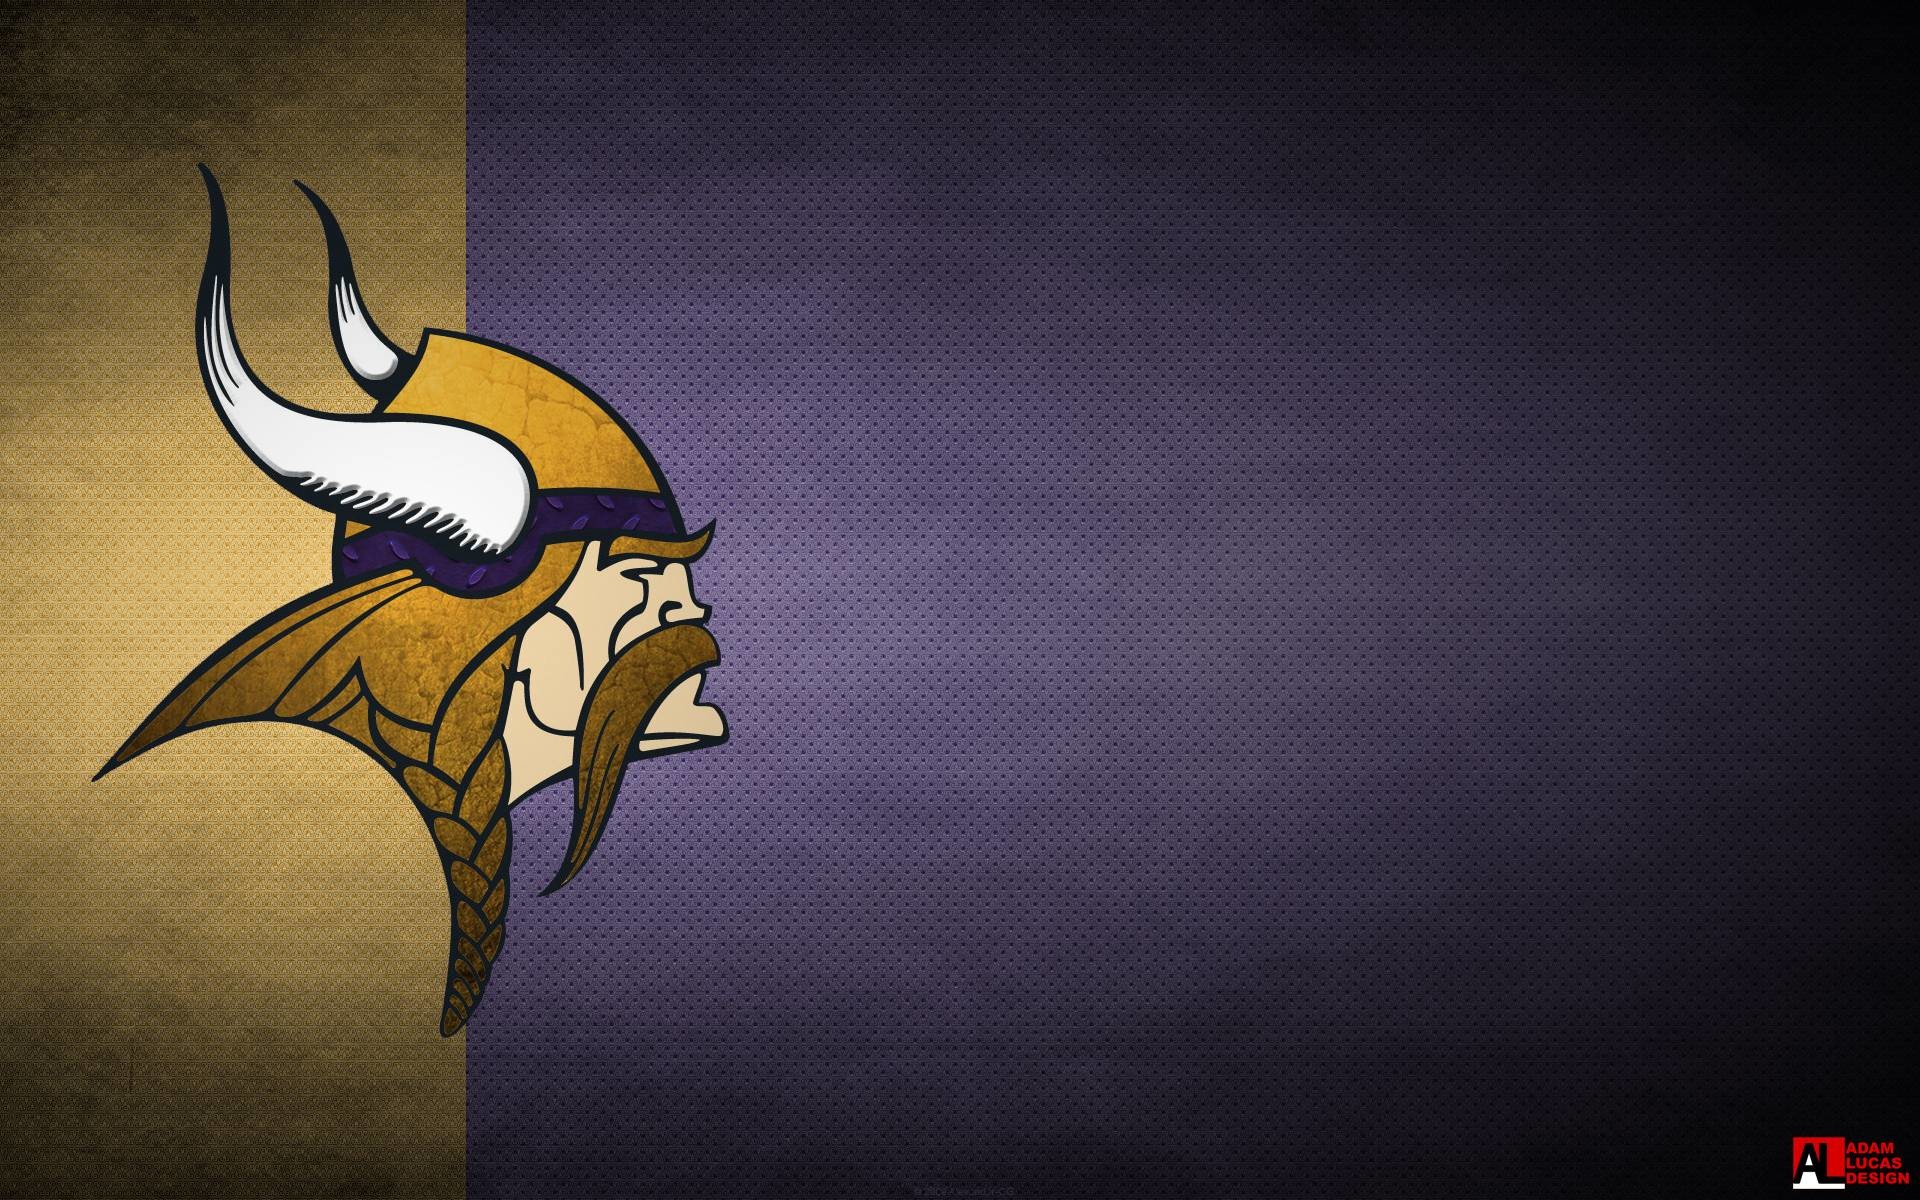  Hd Viking Wallpapers on 